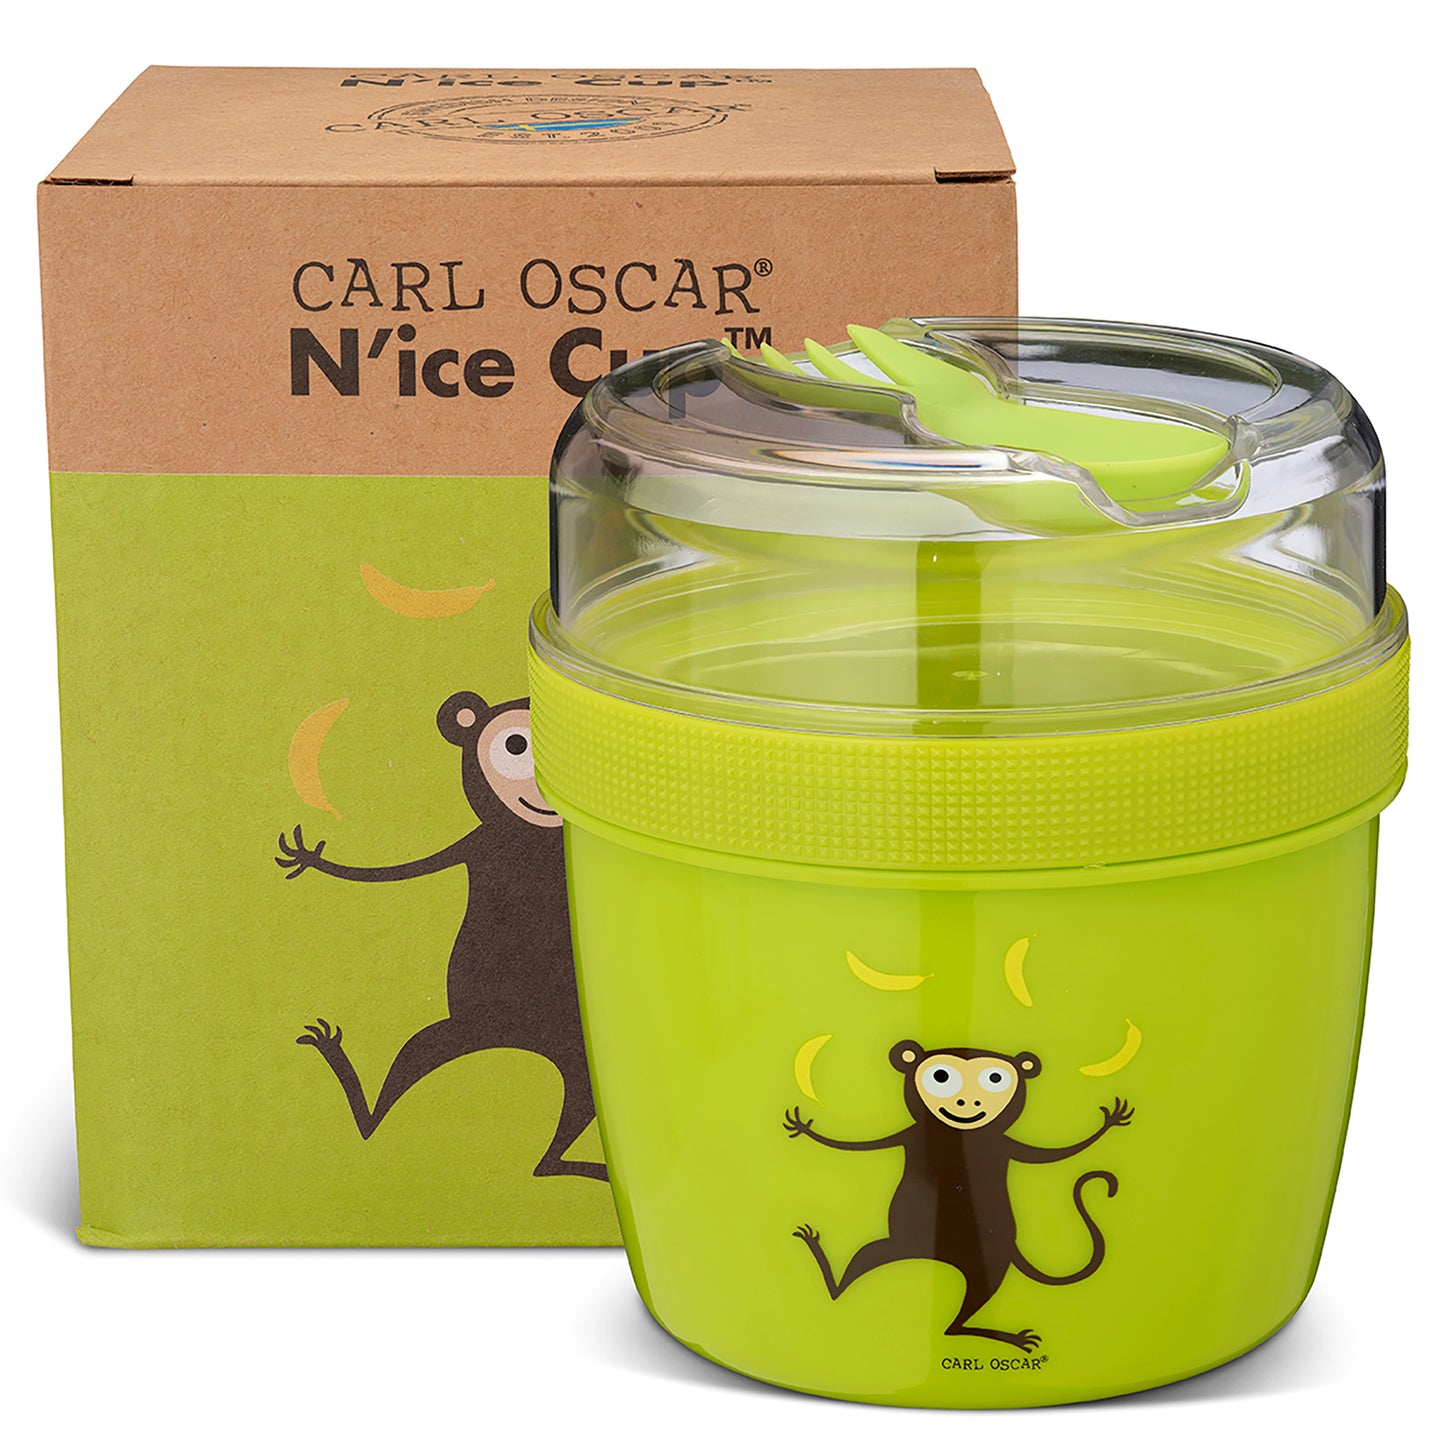 N'ICE CUP™ LARGE, SNACK BOX